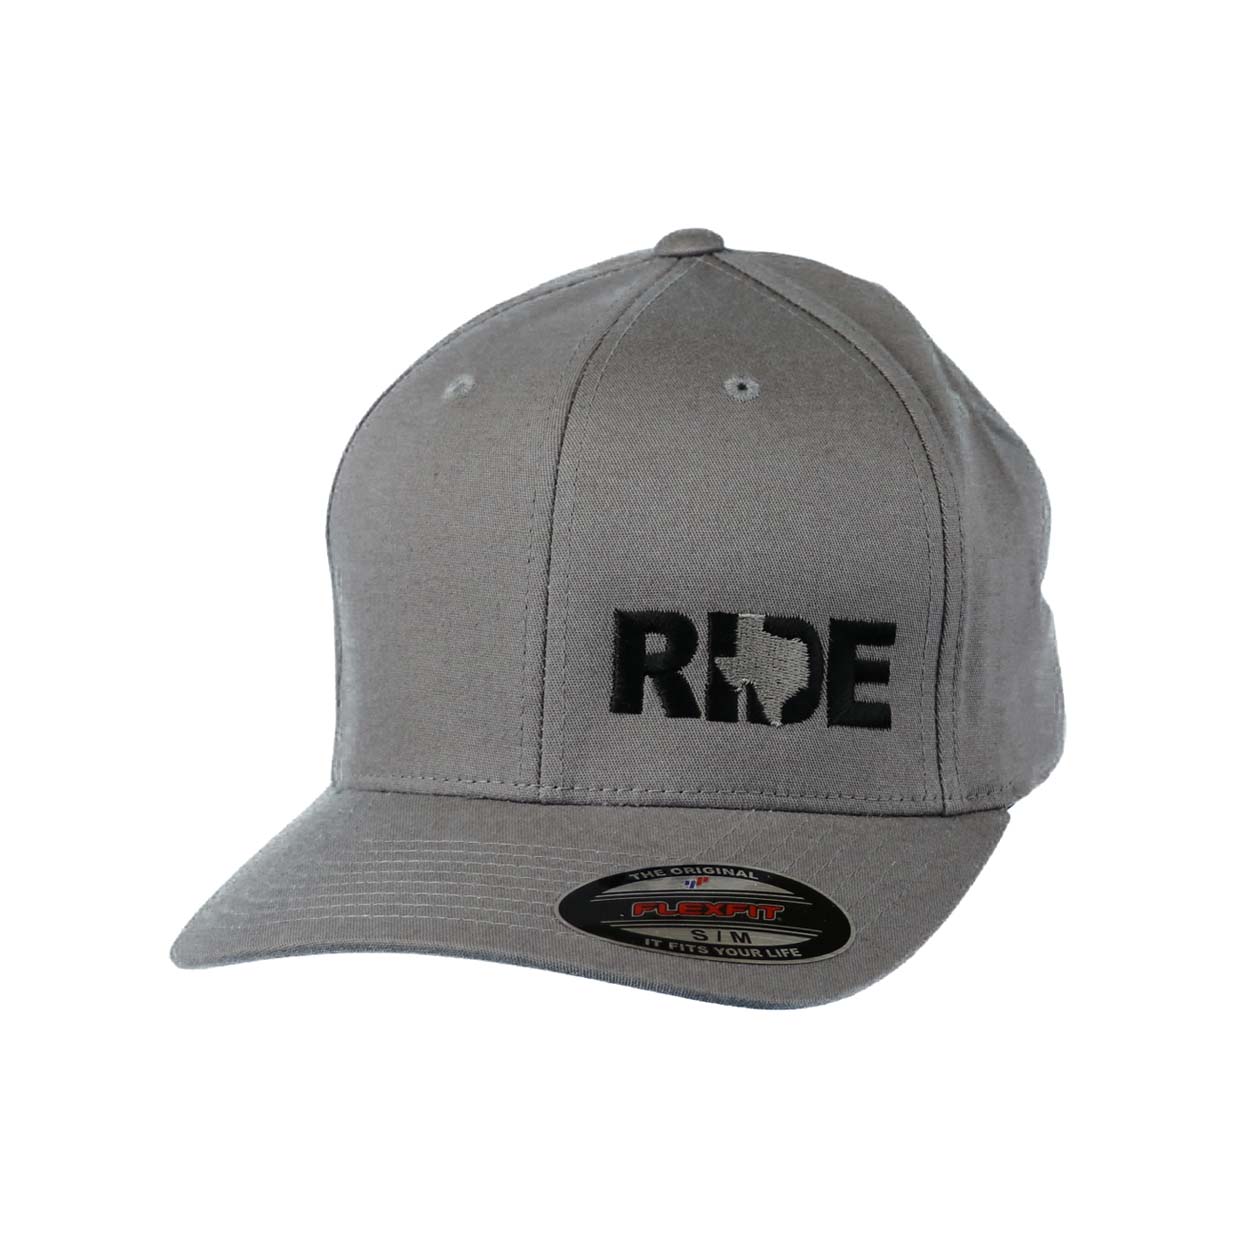 Ride Texas Night Out Embroidered Flex Fit Hat Heather Gray/Black